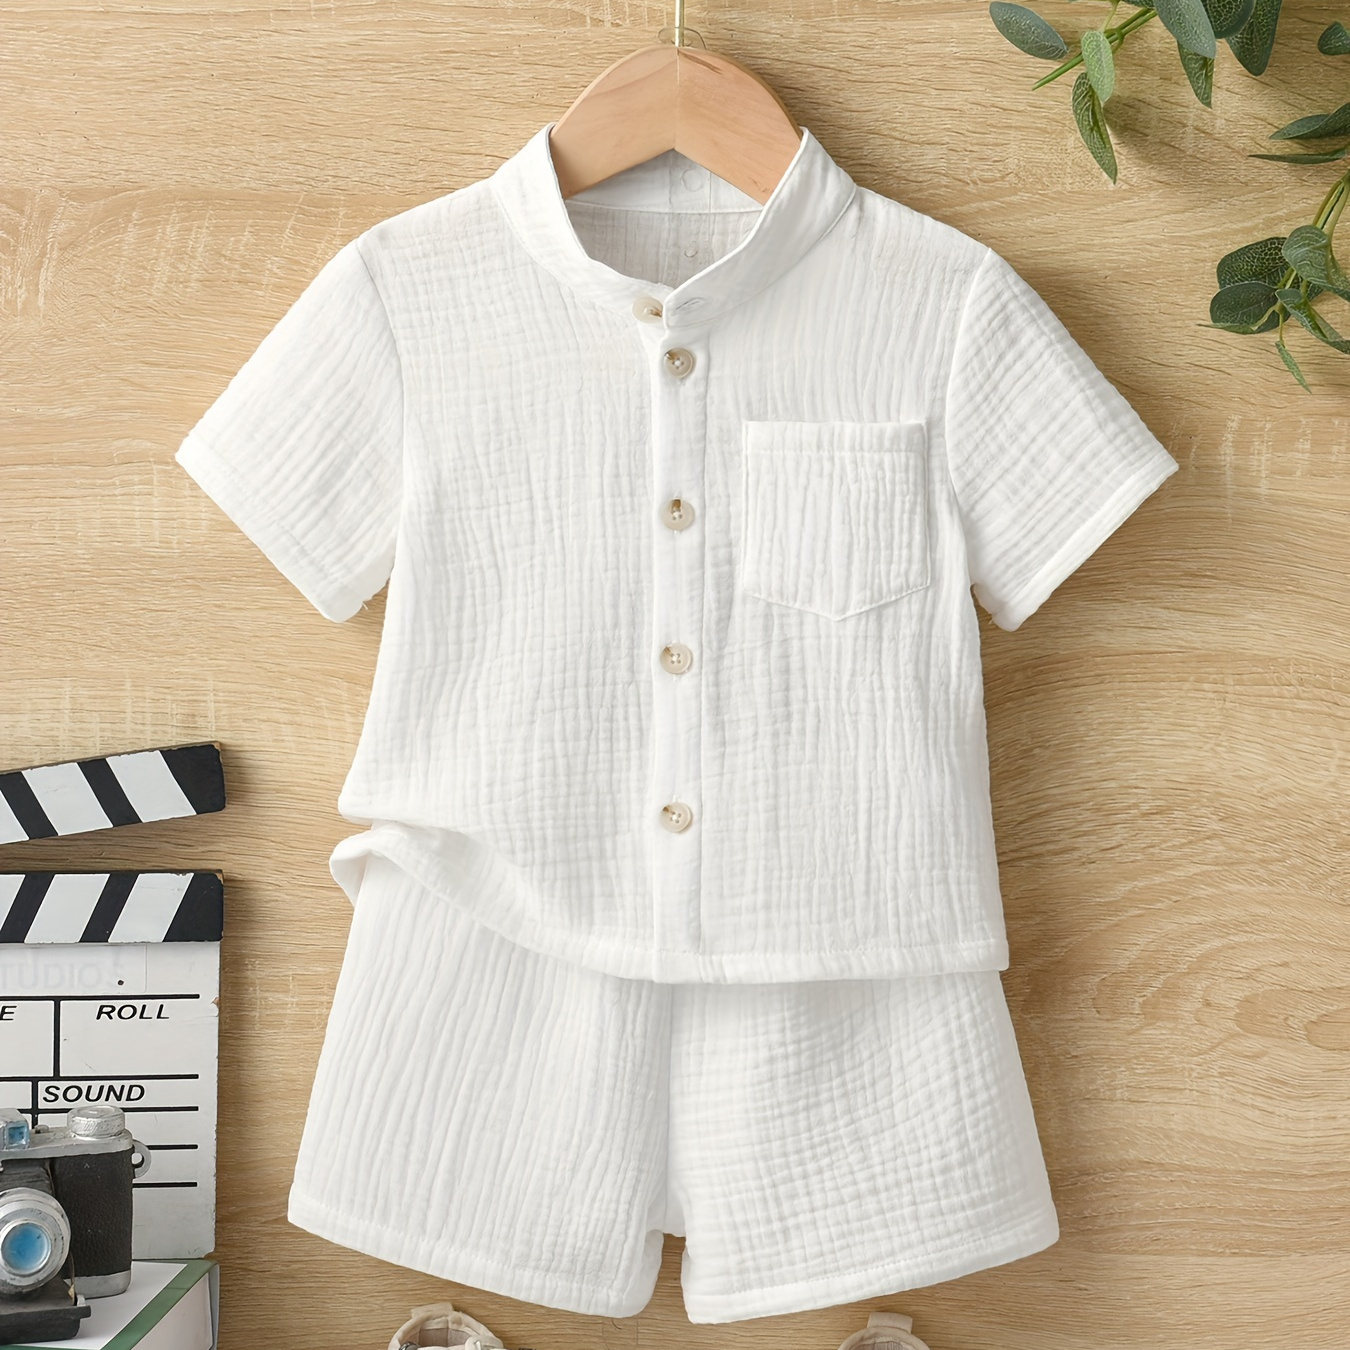 

Baby's Solid Color Cotton Muslin 2pcs Summer Casual Outfit, Short Sleeve Shirt & Shorts Set, Toddler & Infant Boy's Clothes